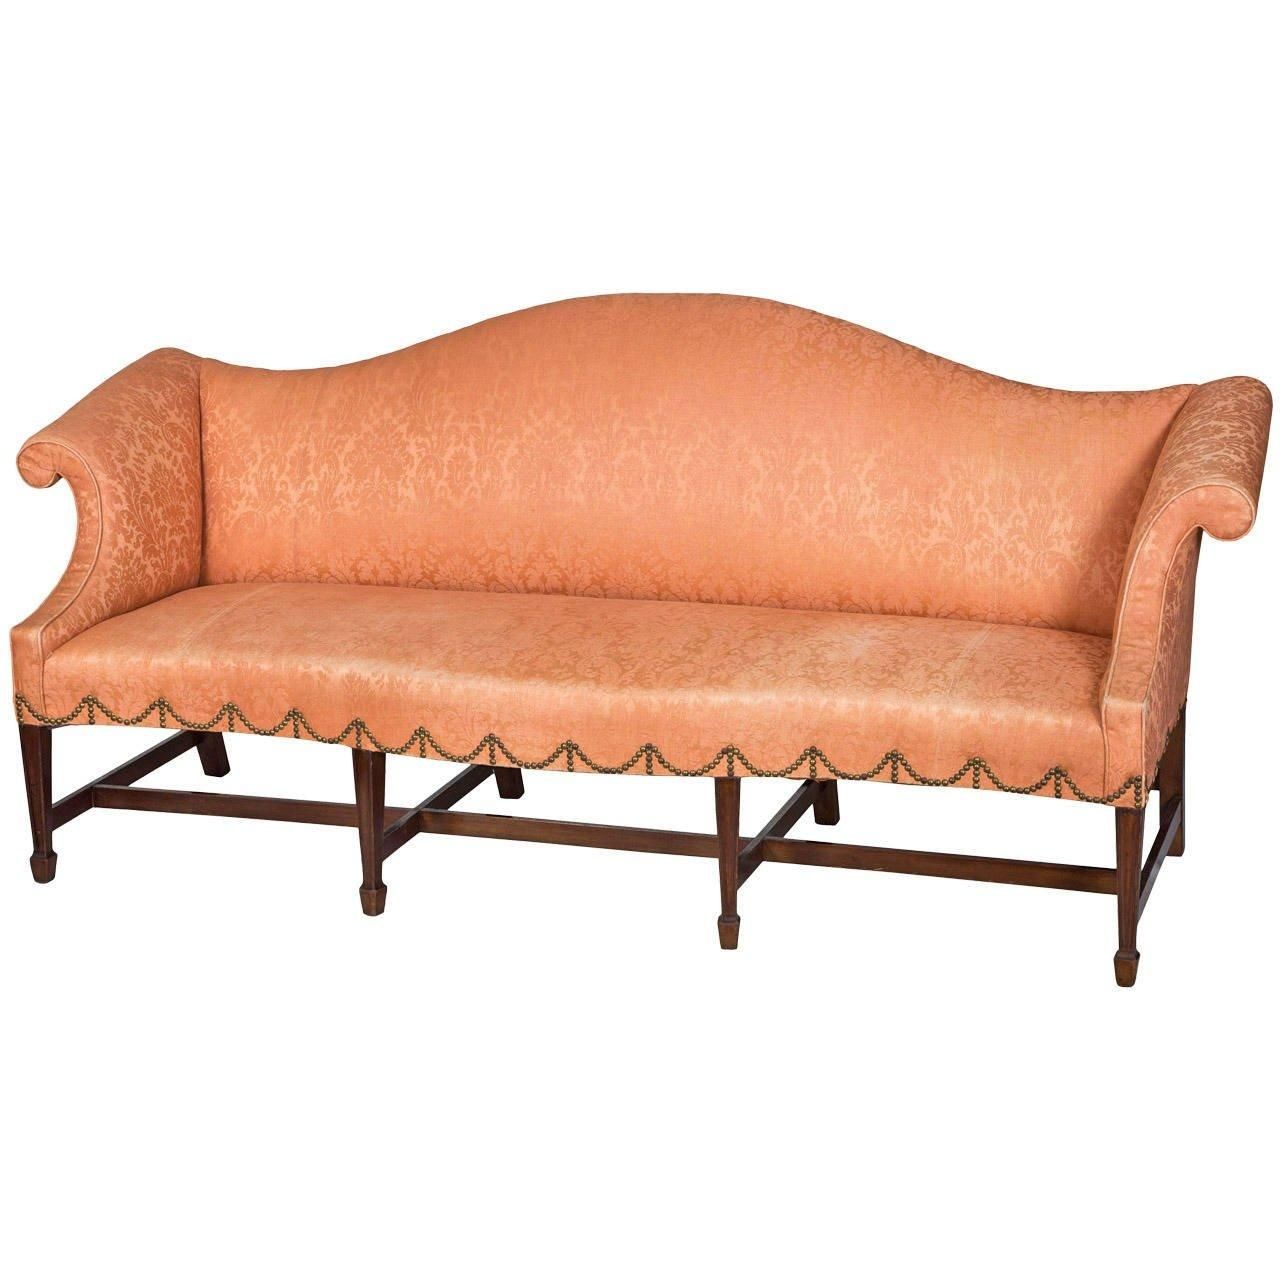 Mahogany Chippendale Camelback Sofa With Bowed Seat And Spade Feet Throughout Chippendale Camelback Sofas (View 20 of 20)